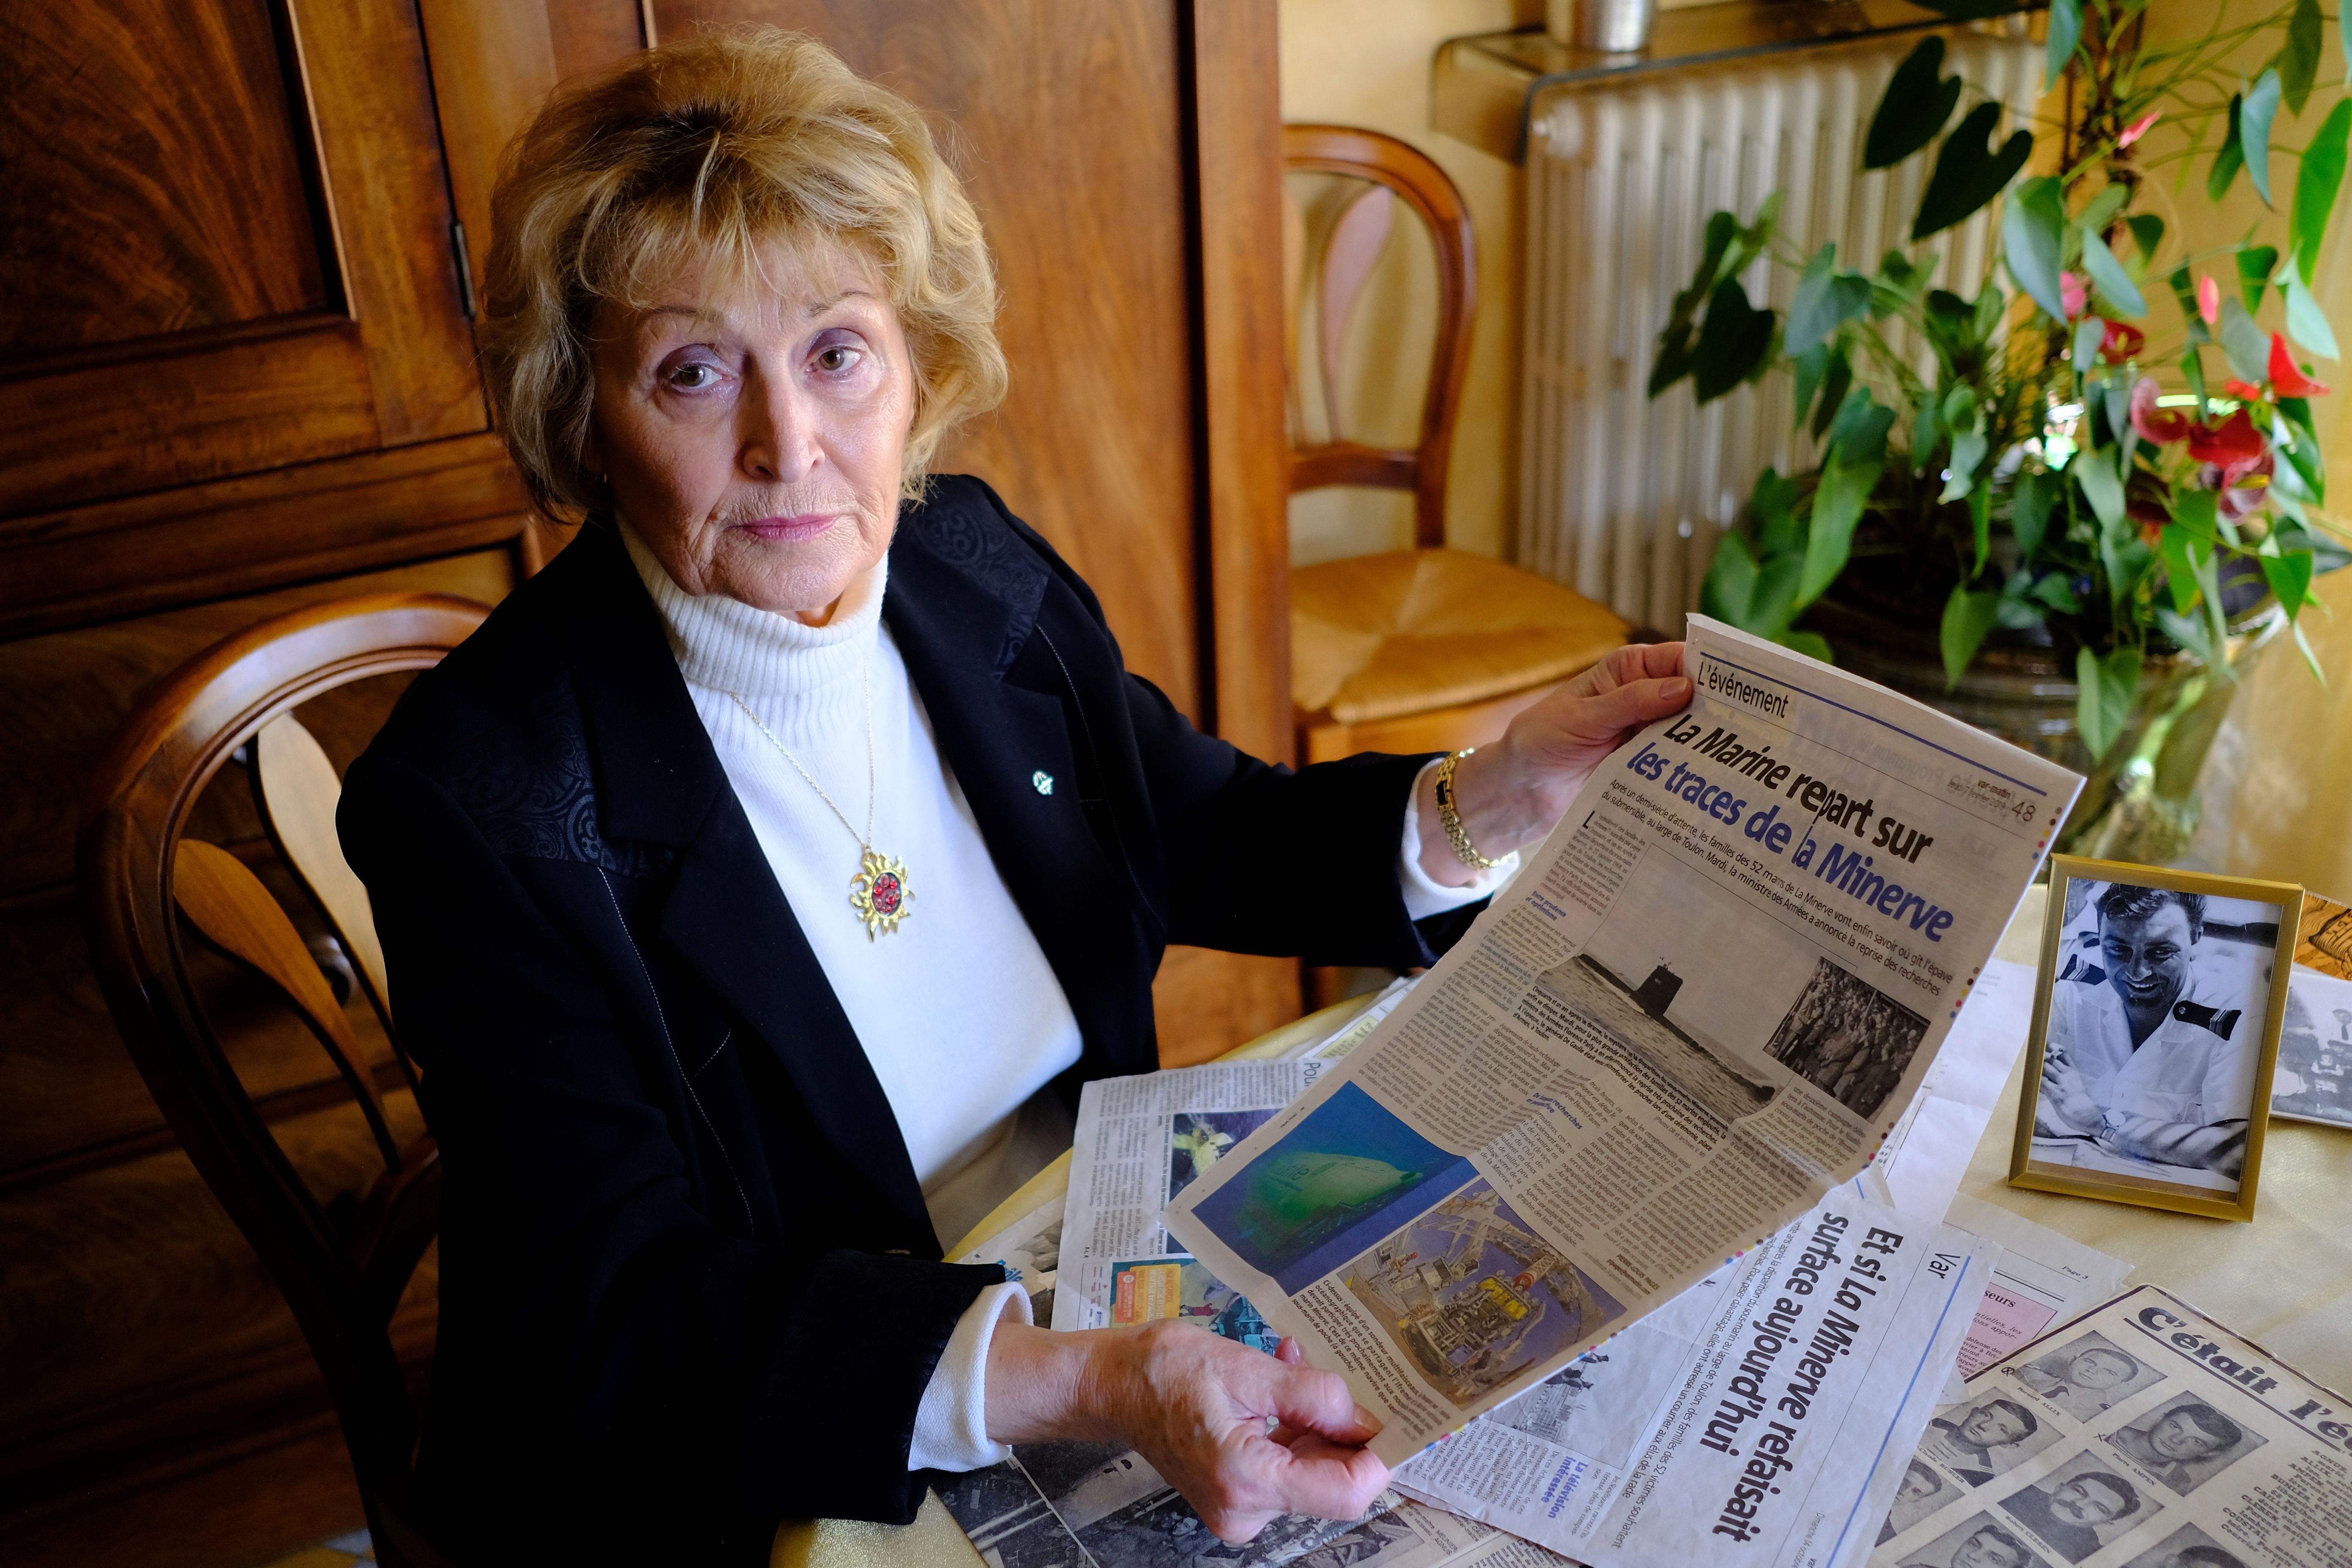 Widow Therese Scheirmann-Descamps Demanded For New Search Mission (Photo by BORIS HORVAT/AFP/Getty Images)